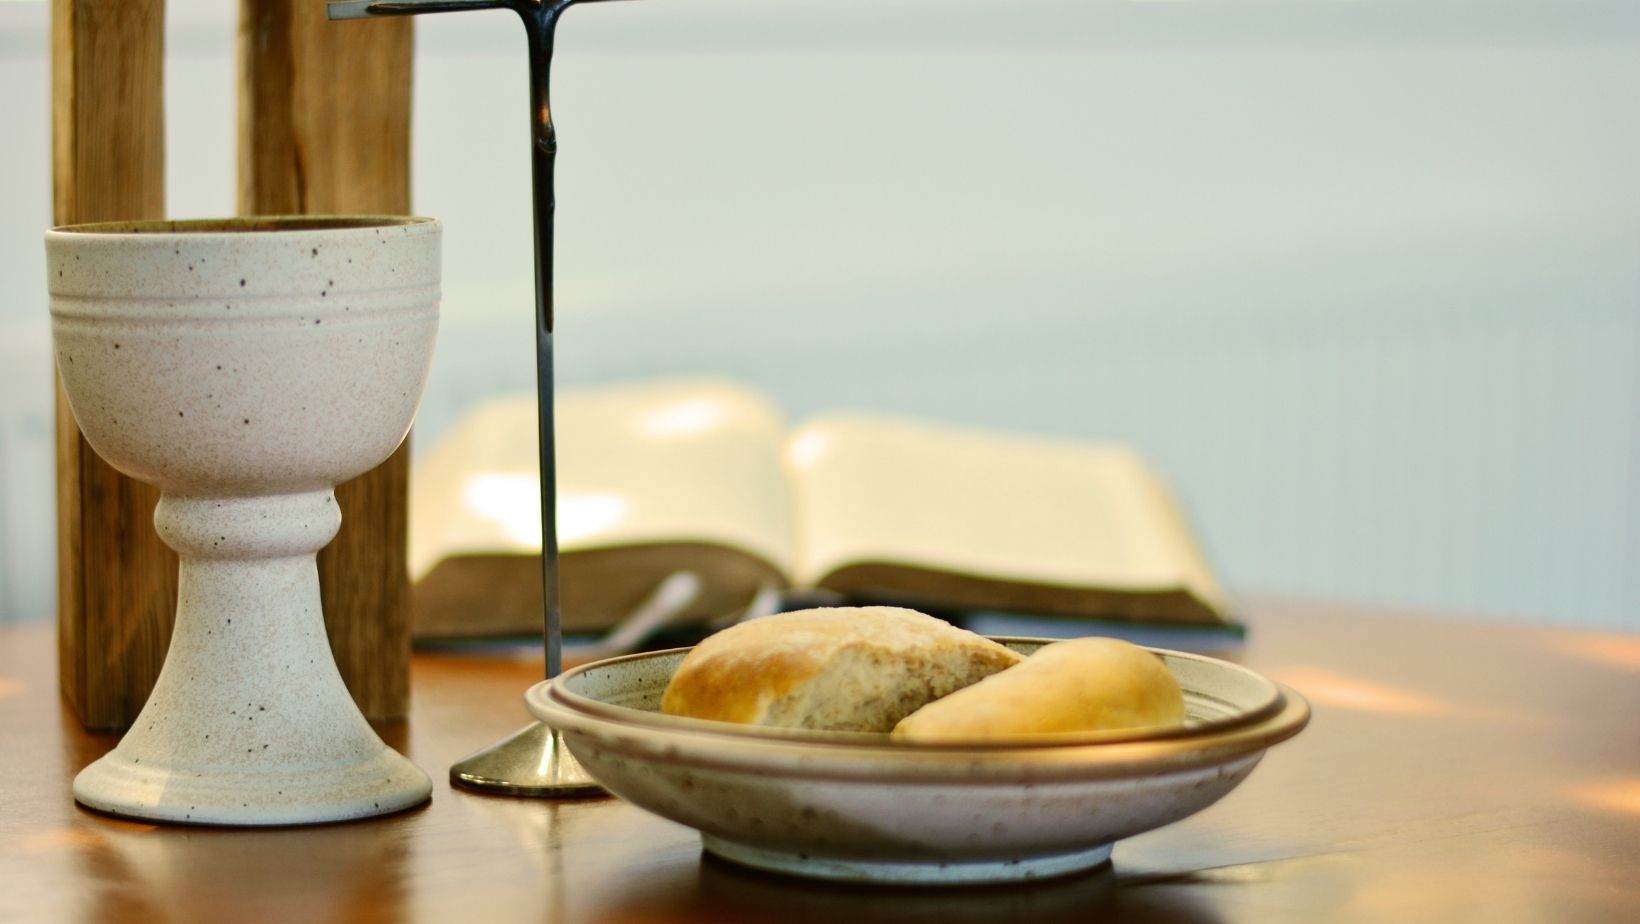 Summarizing the Bread & Cup of the Lord's Supper